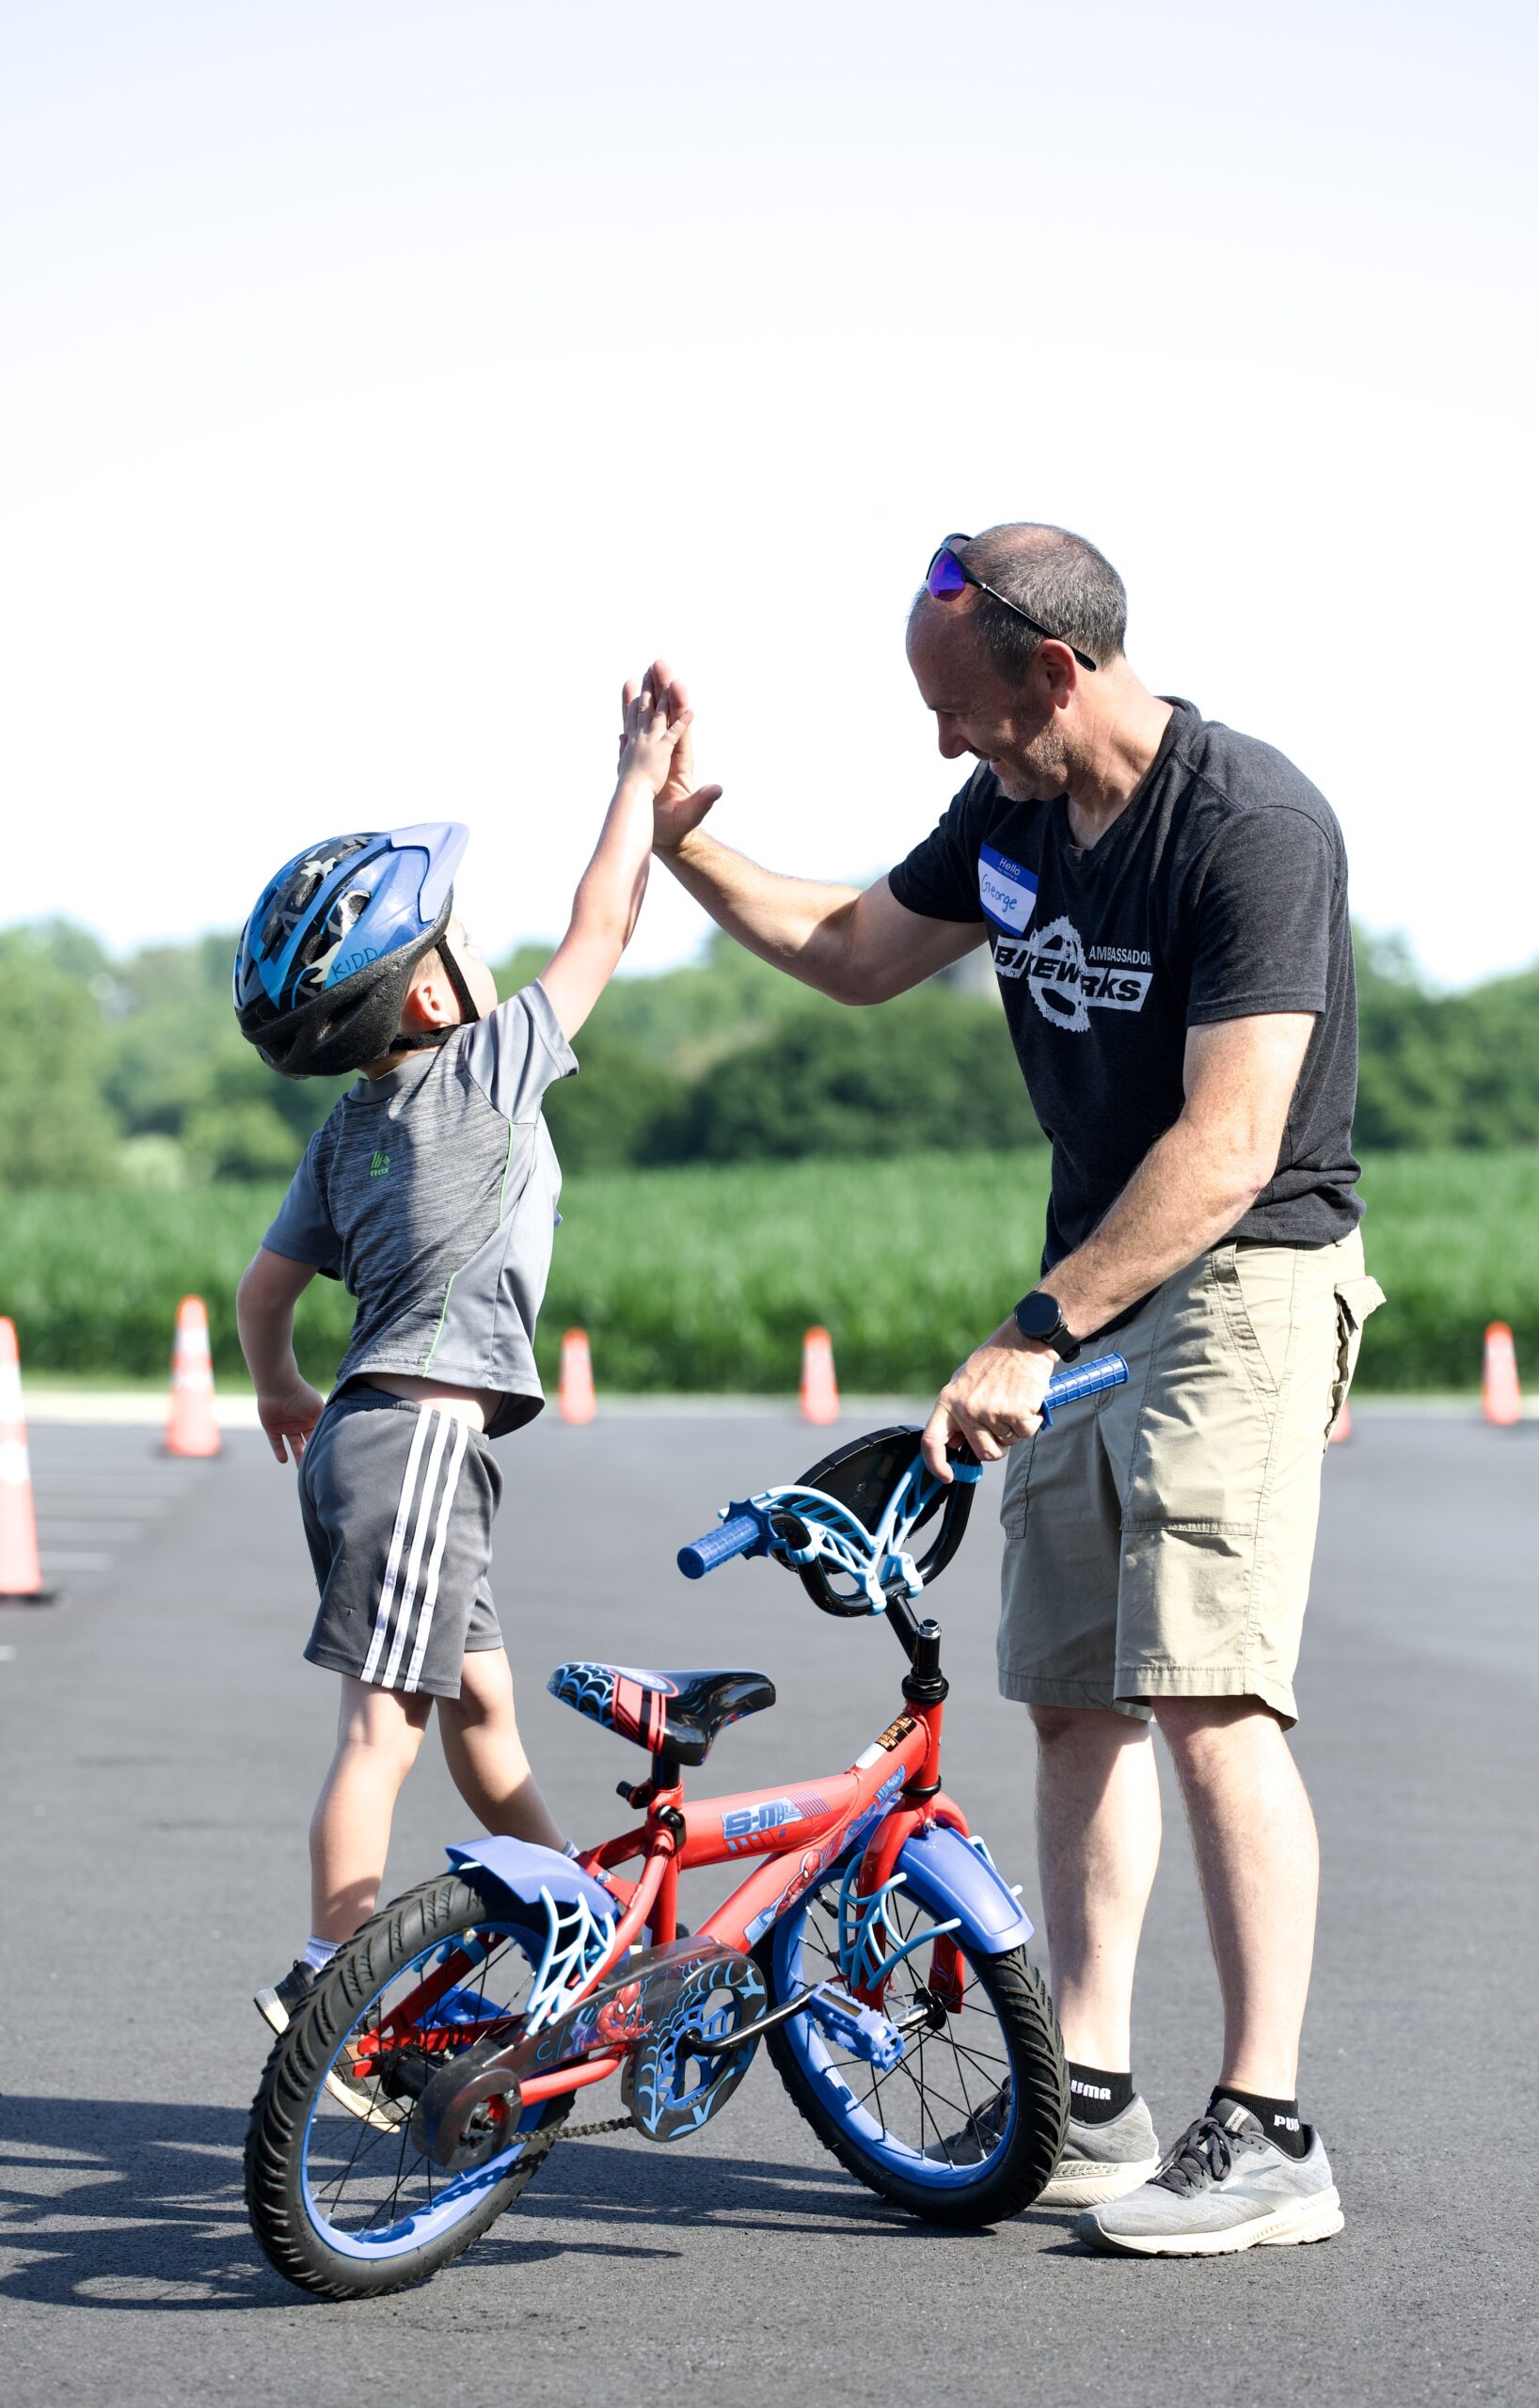 Learn-to-ride kids clinics offered from Lititz Bikeworks are free to anyone who registers in advance.